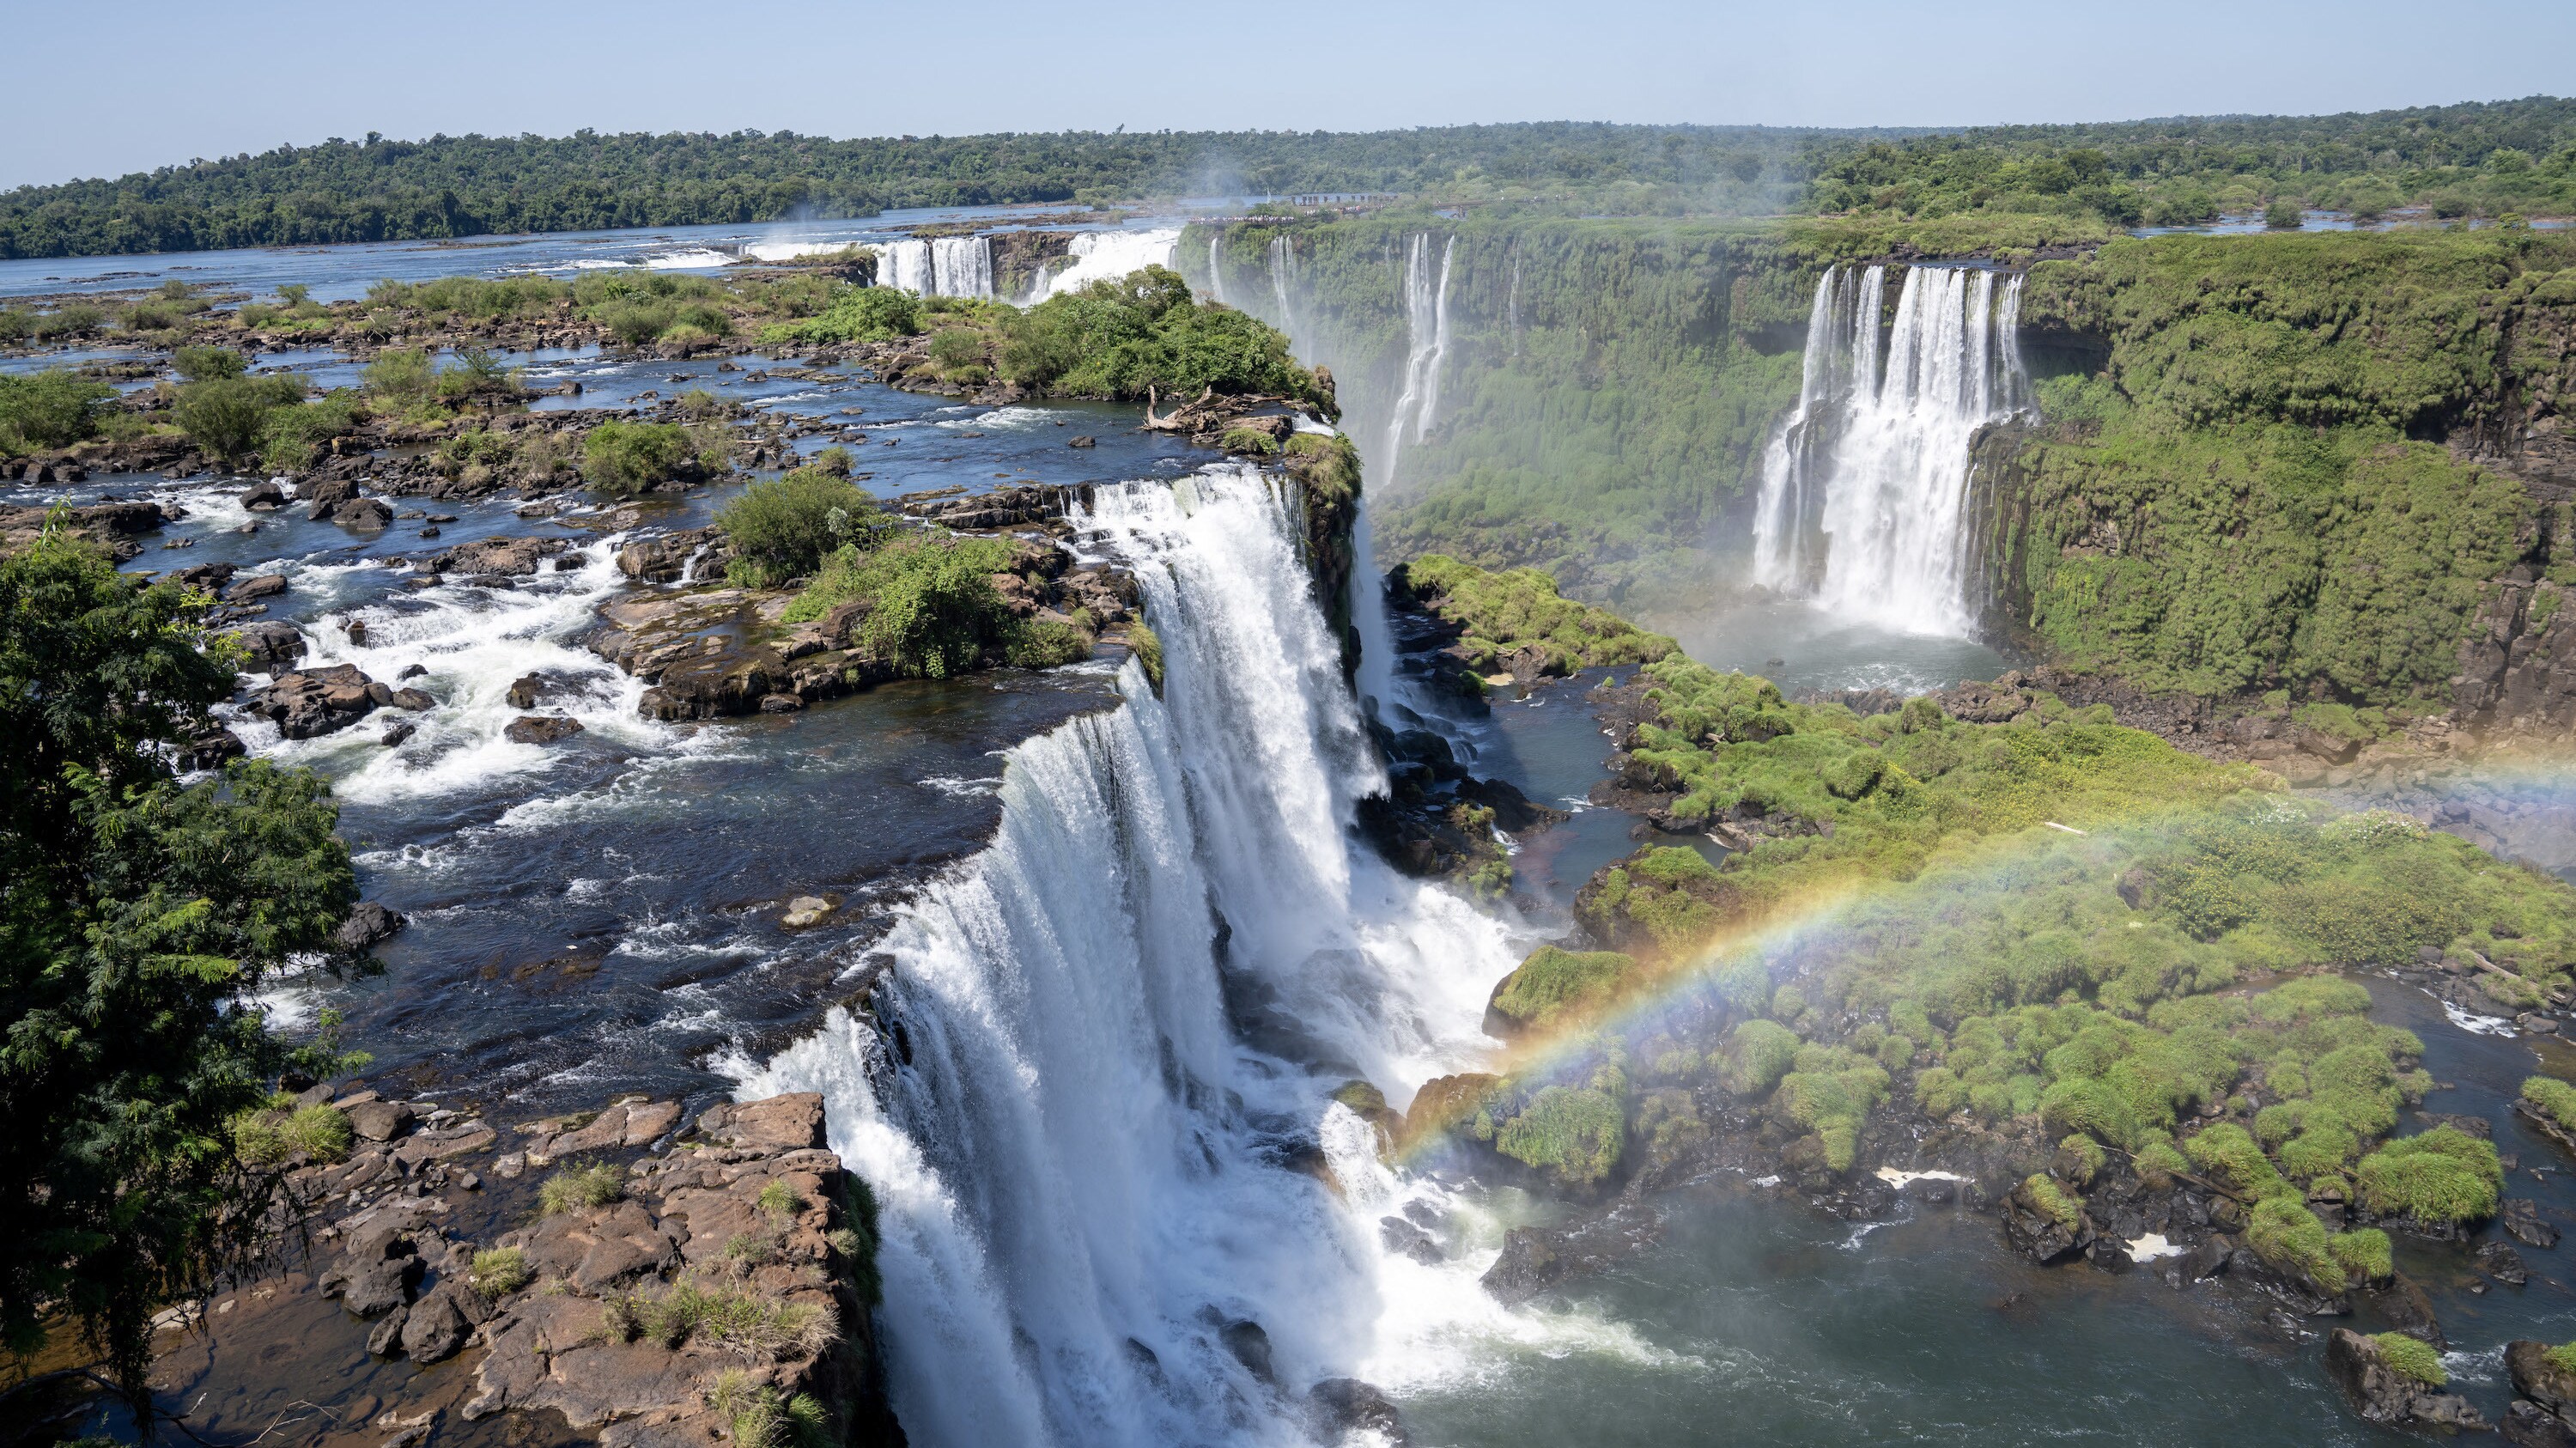 View of the Iguaçu falls. The name 'Iguaçu' comes from the Tupi-Guaraní words "y", meaning "water", and 'ûasú', meaning "big". Legend has it that a deity planned to marry a beautiful woman named Naipí, who fled with her mortal lover Tarobá in a canoe. In a rage, the deity sliced the river, creating the waterfalls and condemning the lovers to an eternal fall.  (National Geographic for Disney+/Lea Hejn)